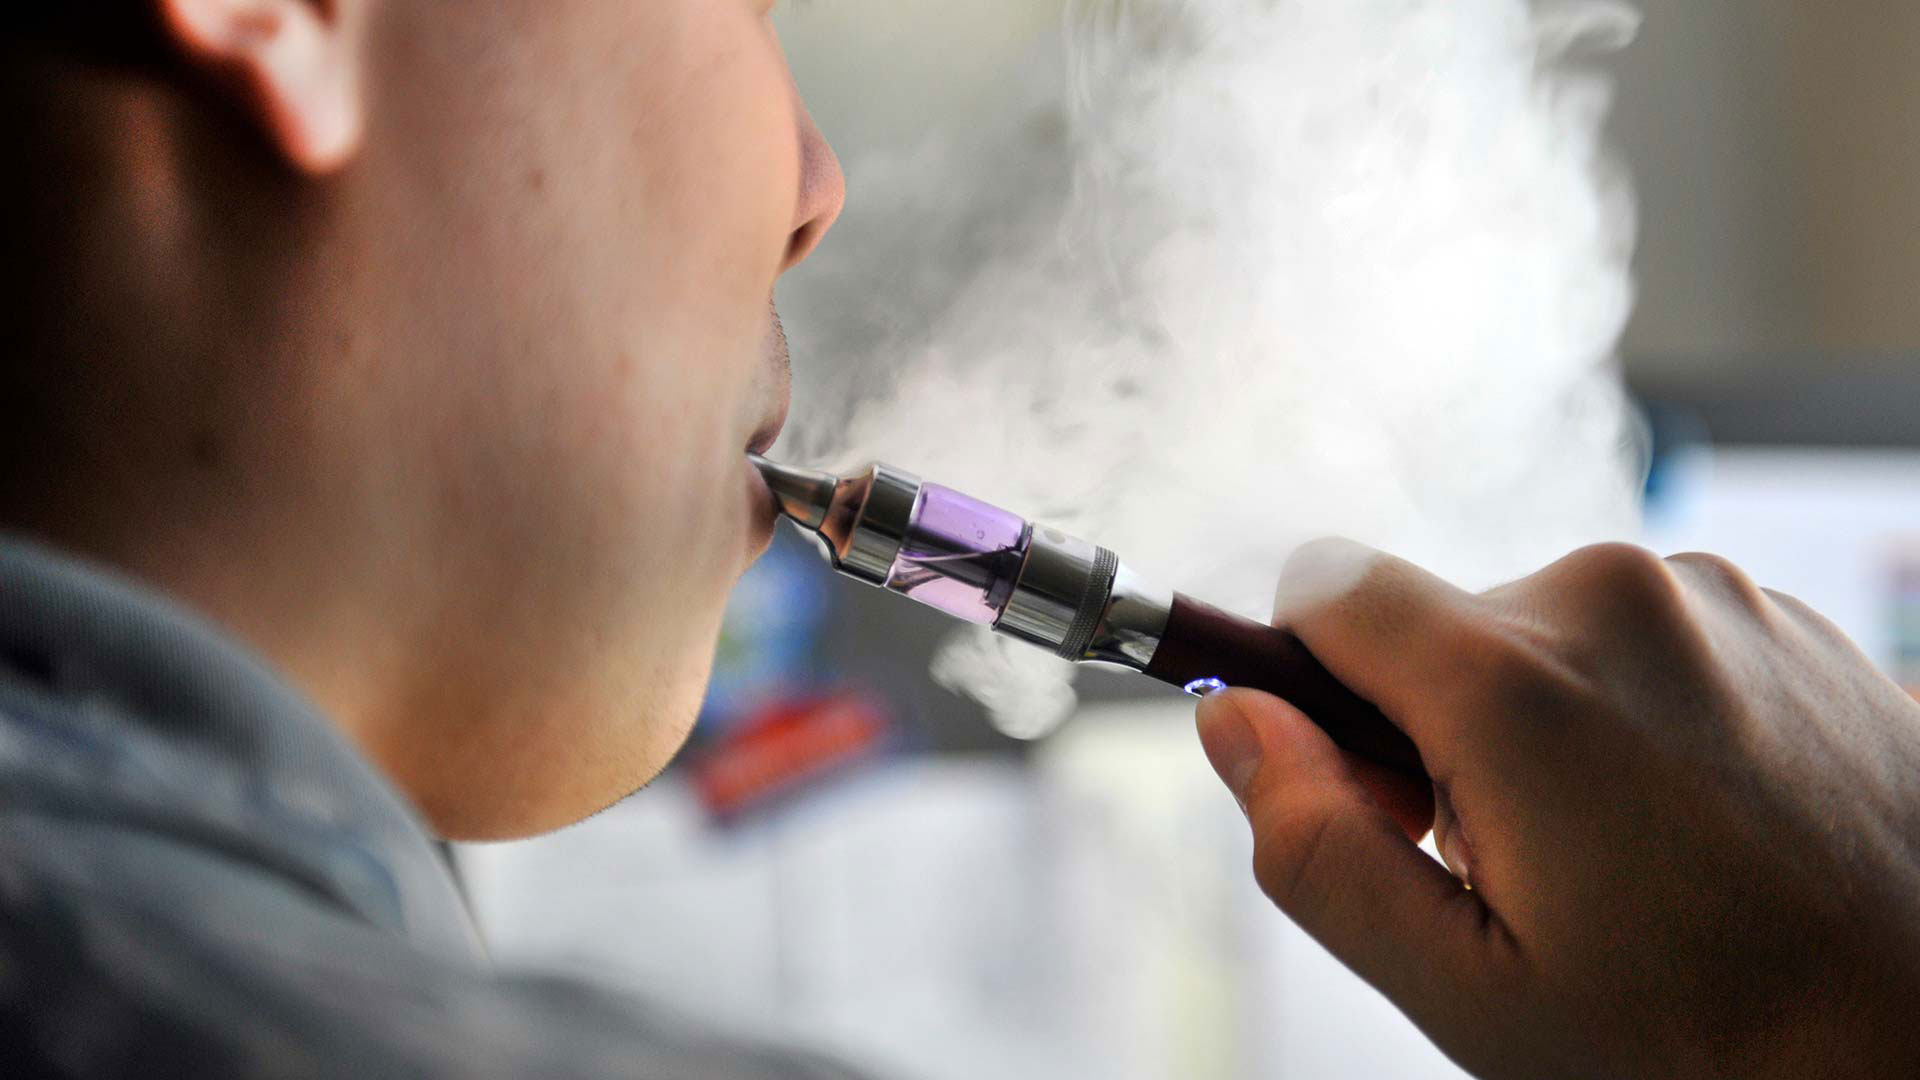 The Arizona Poison and Drug Information Center says people should stop using e-cigarettes while an investigation into respiratory illnesses continues.